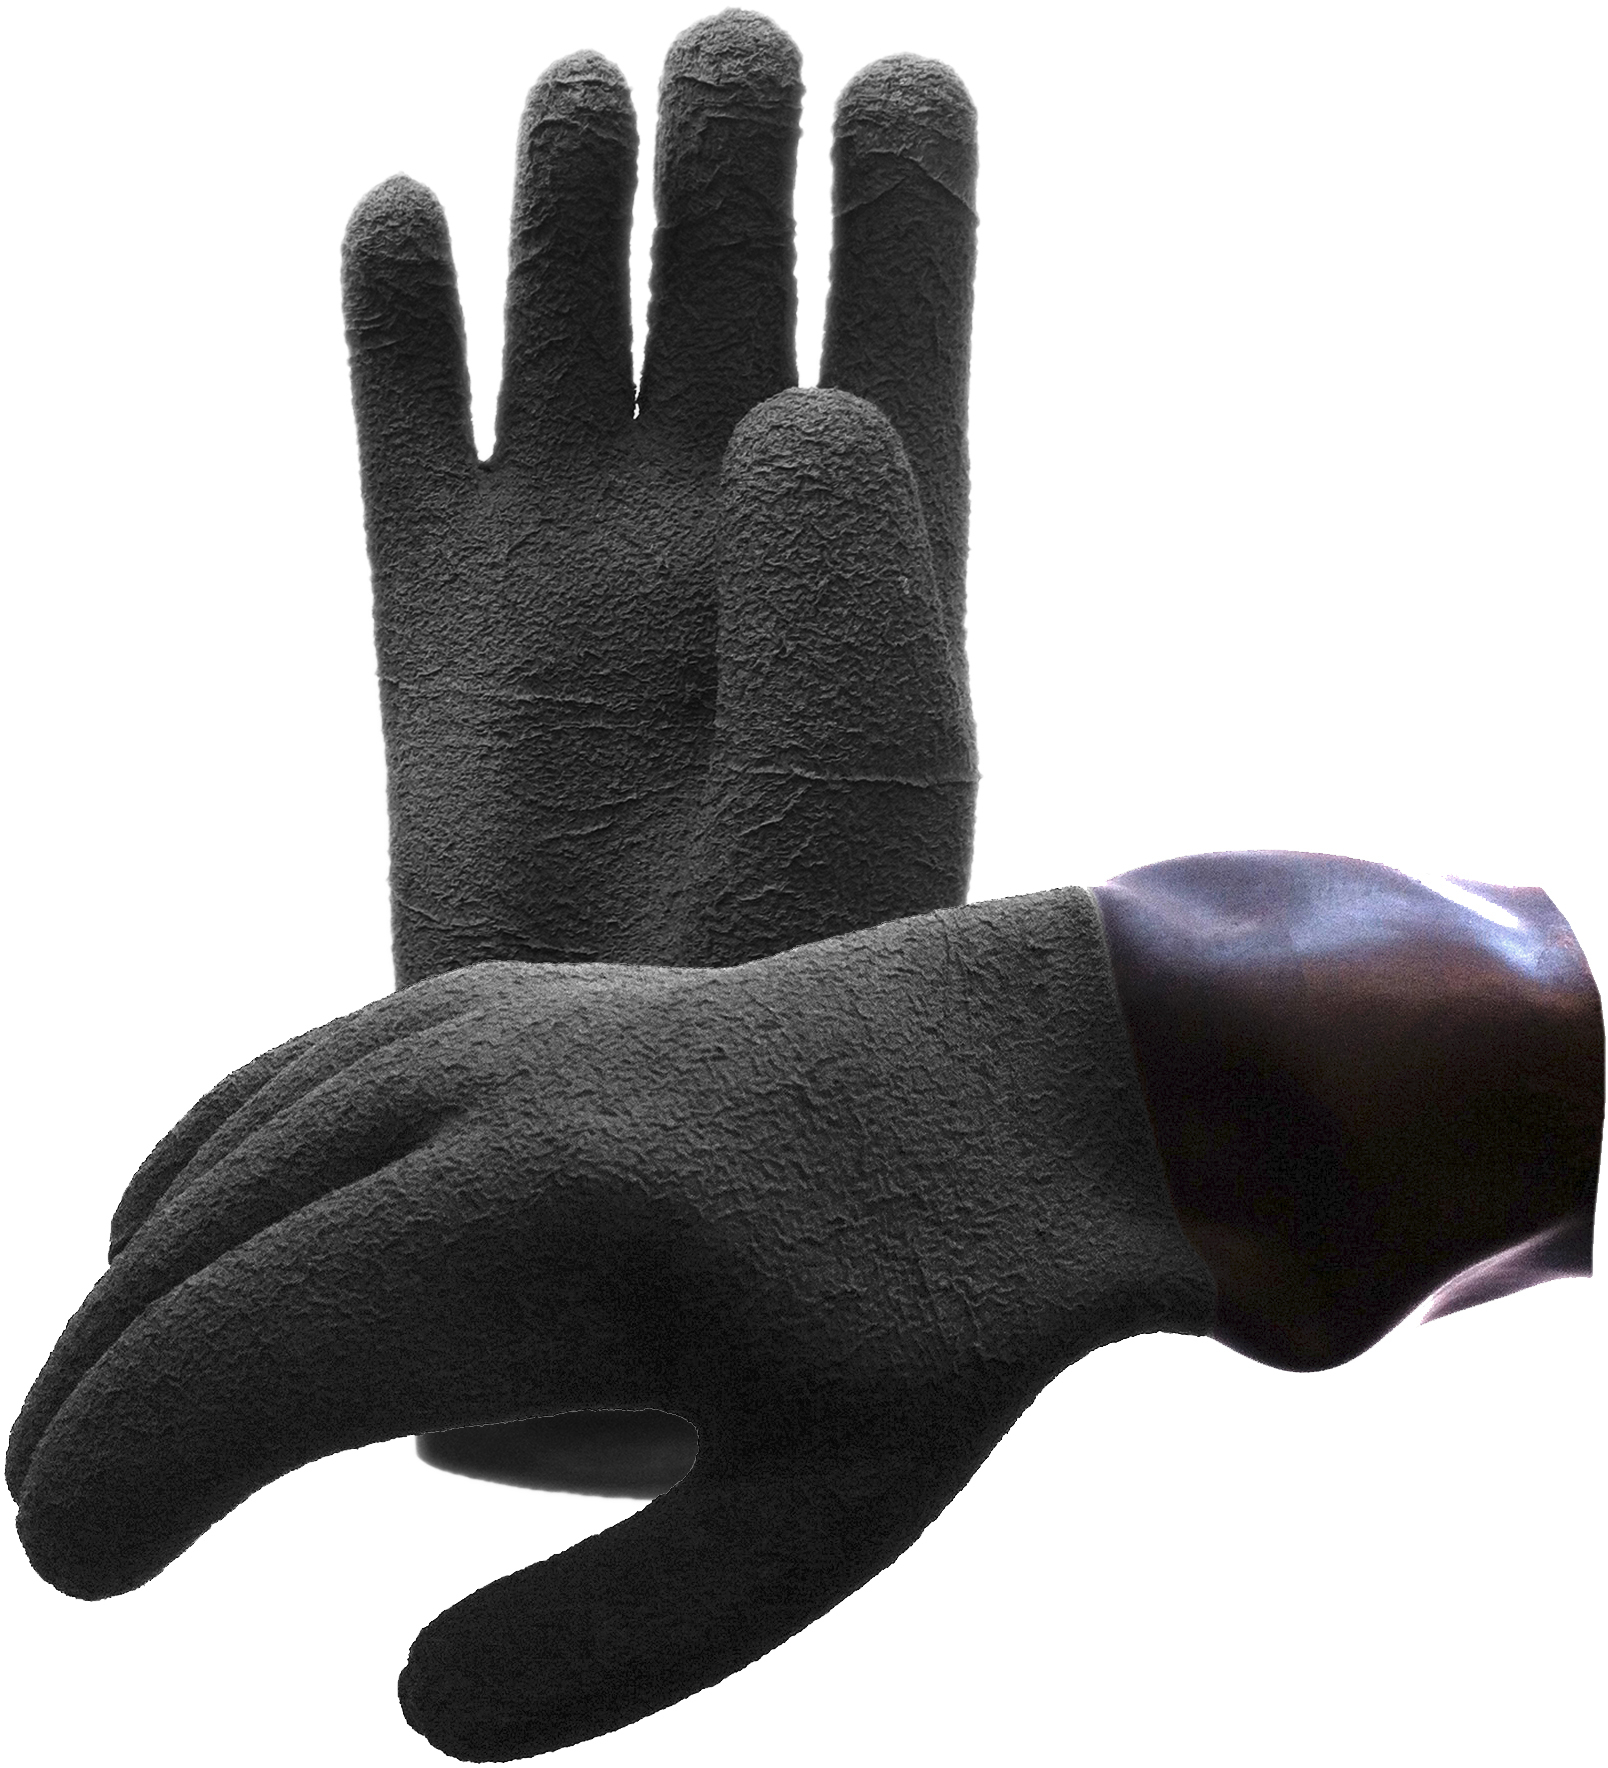 Waterproof Antares Oval Ring System Dry Glove Kit With Glove